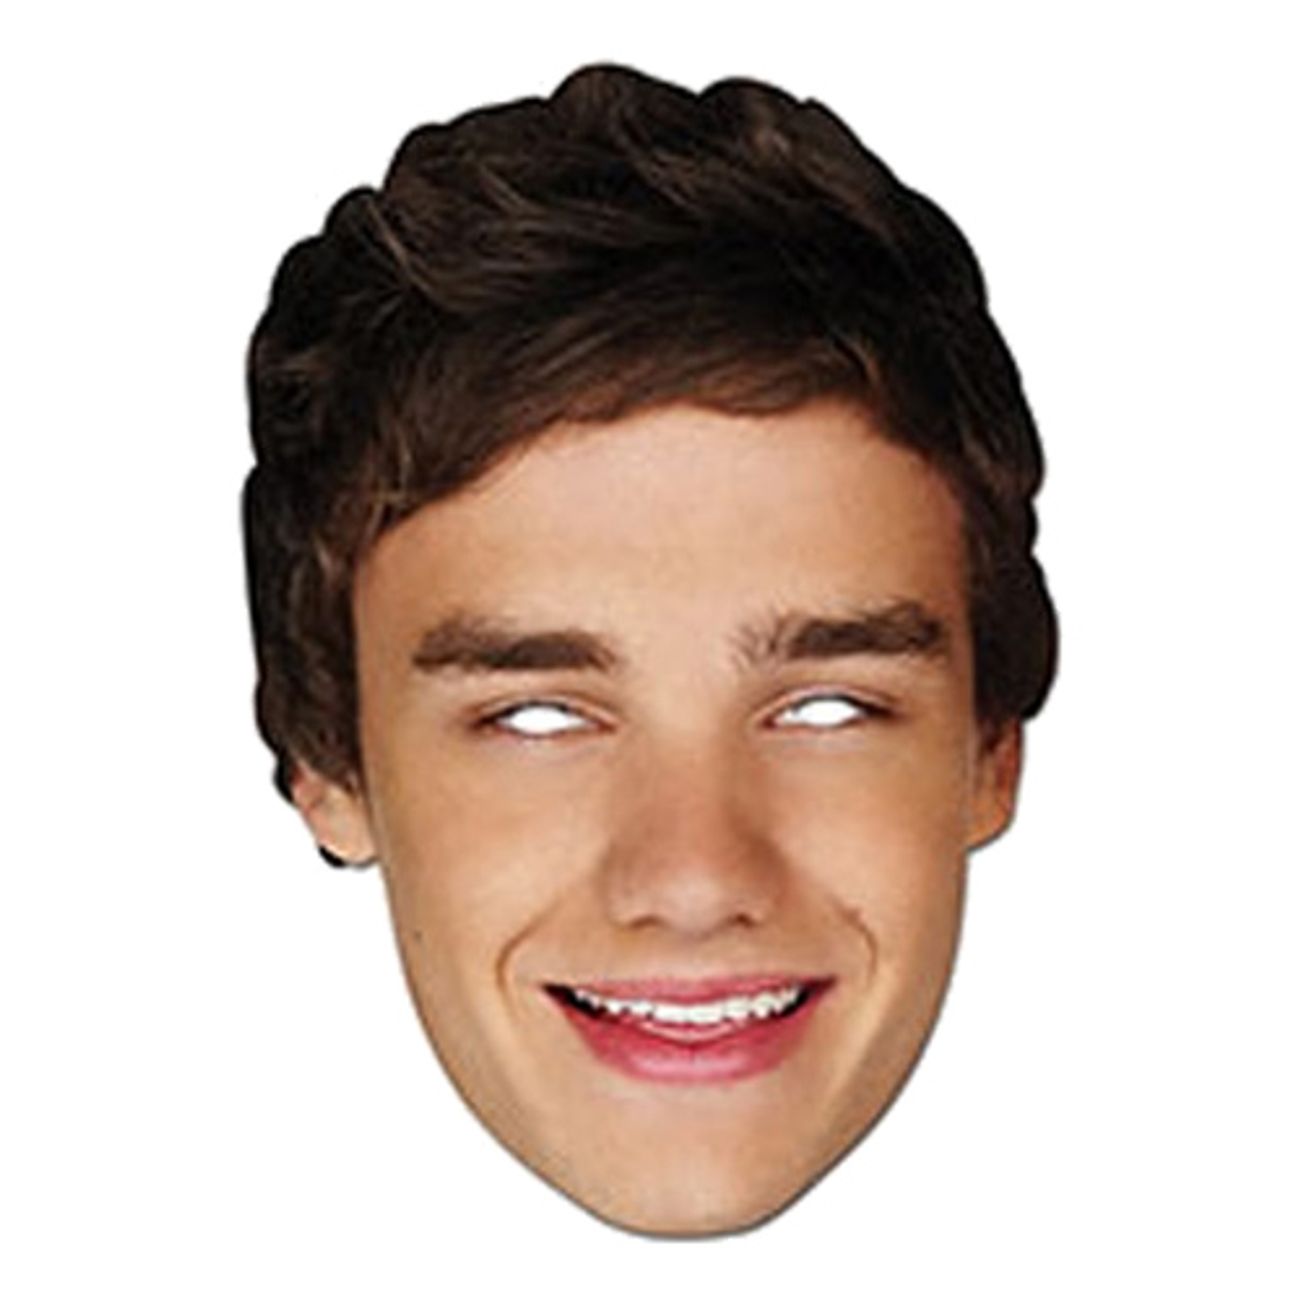 liam-payne-pappmask-1